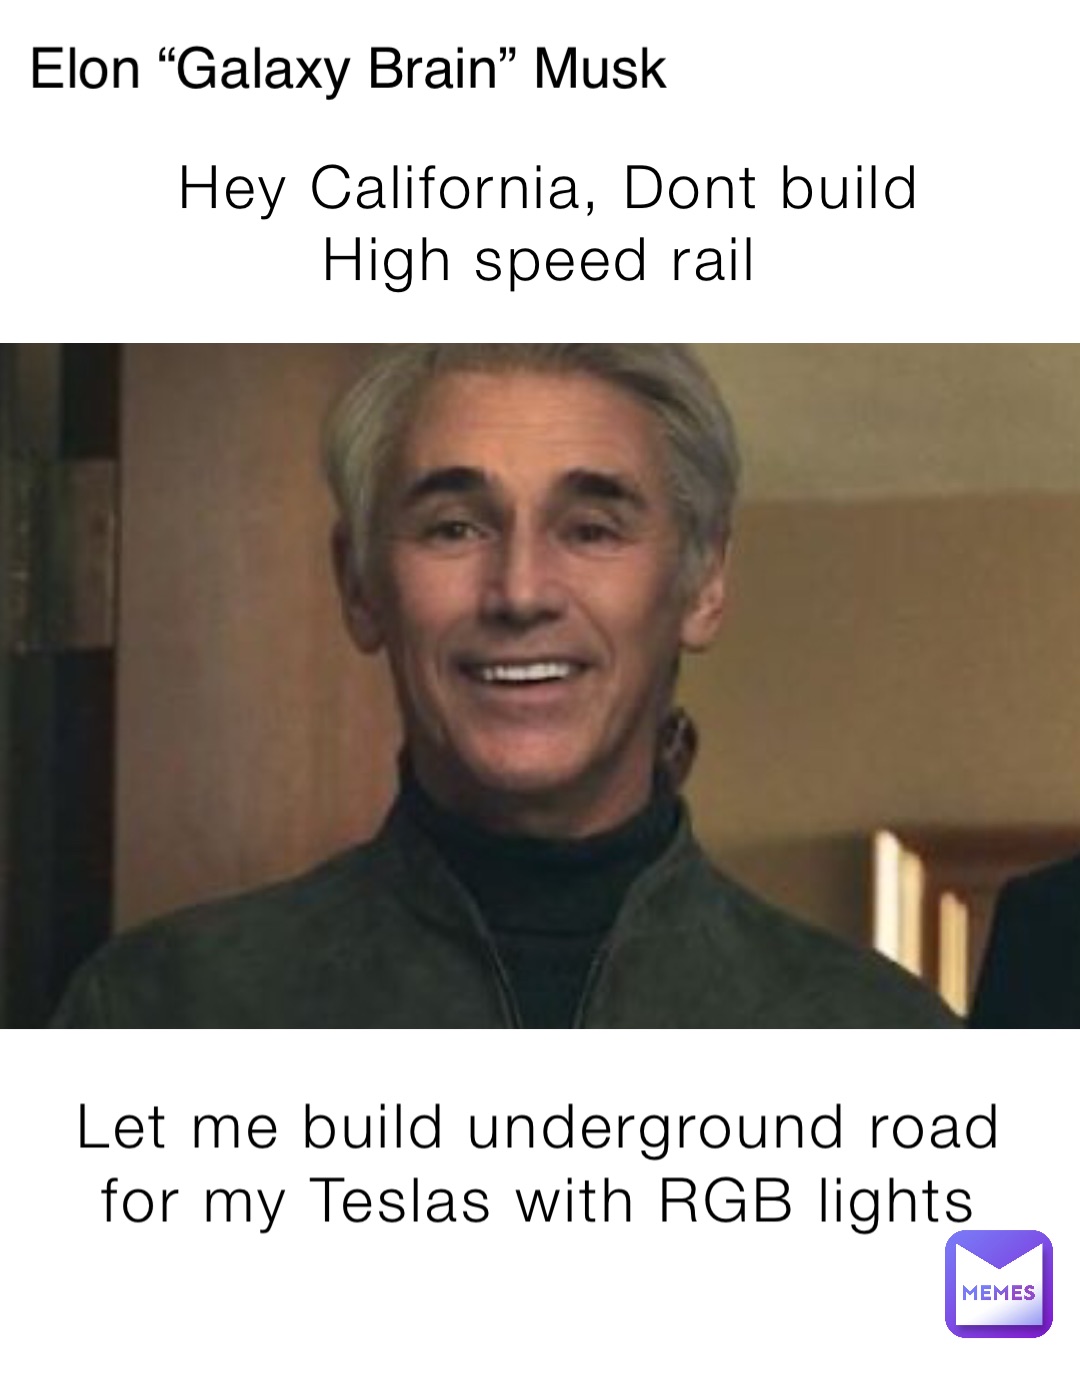 Hey California, Dont build High speed rail Let me build underground road for my Teslas with RGB lights Elon “Galaxy Brain” Musk